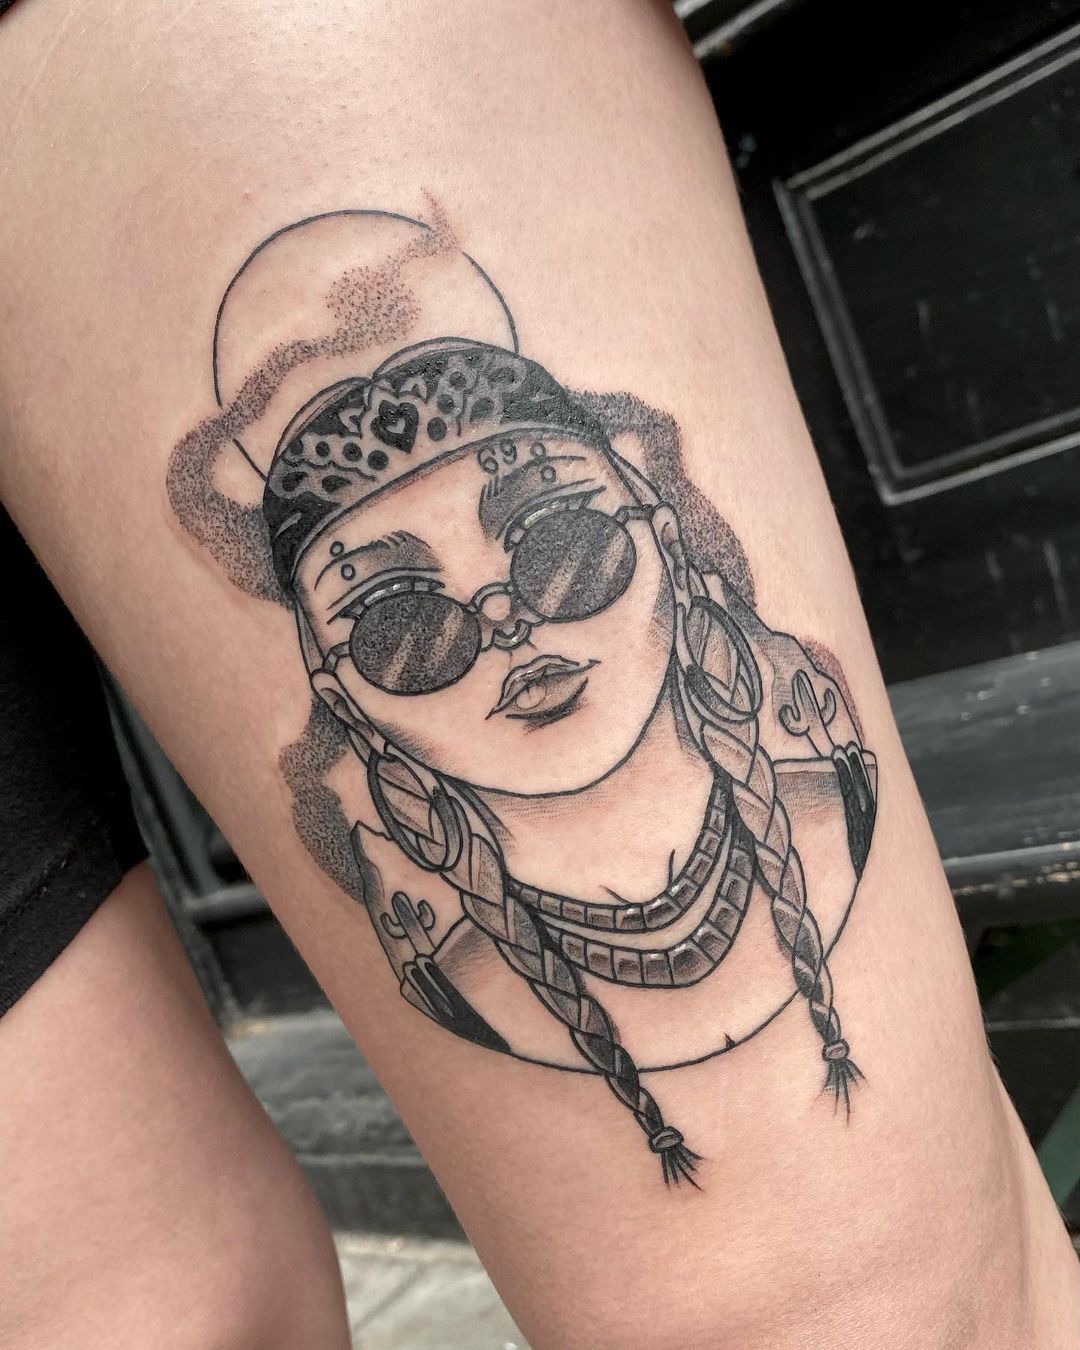 Inspired by Janis Joplin, the hippie... - Mad Science Tattoo | Facebook